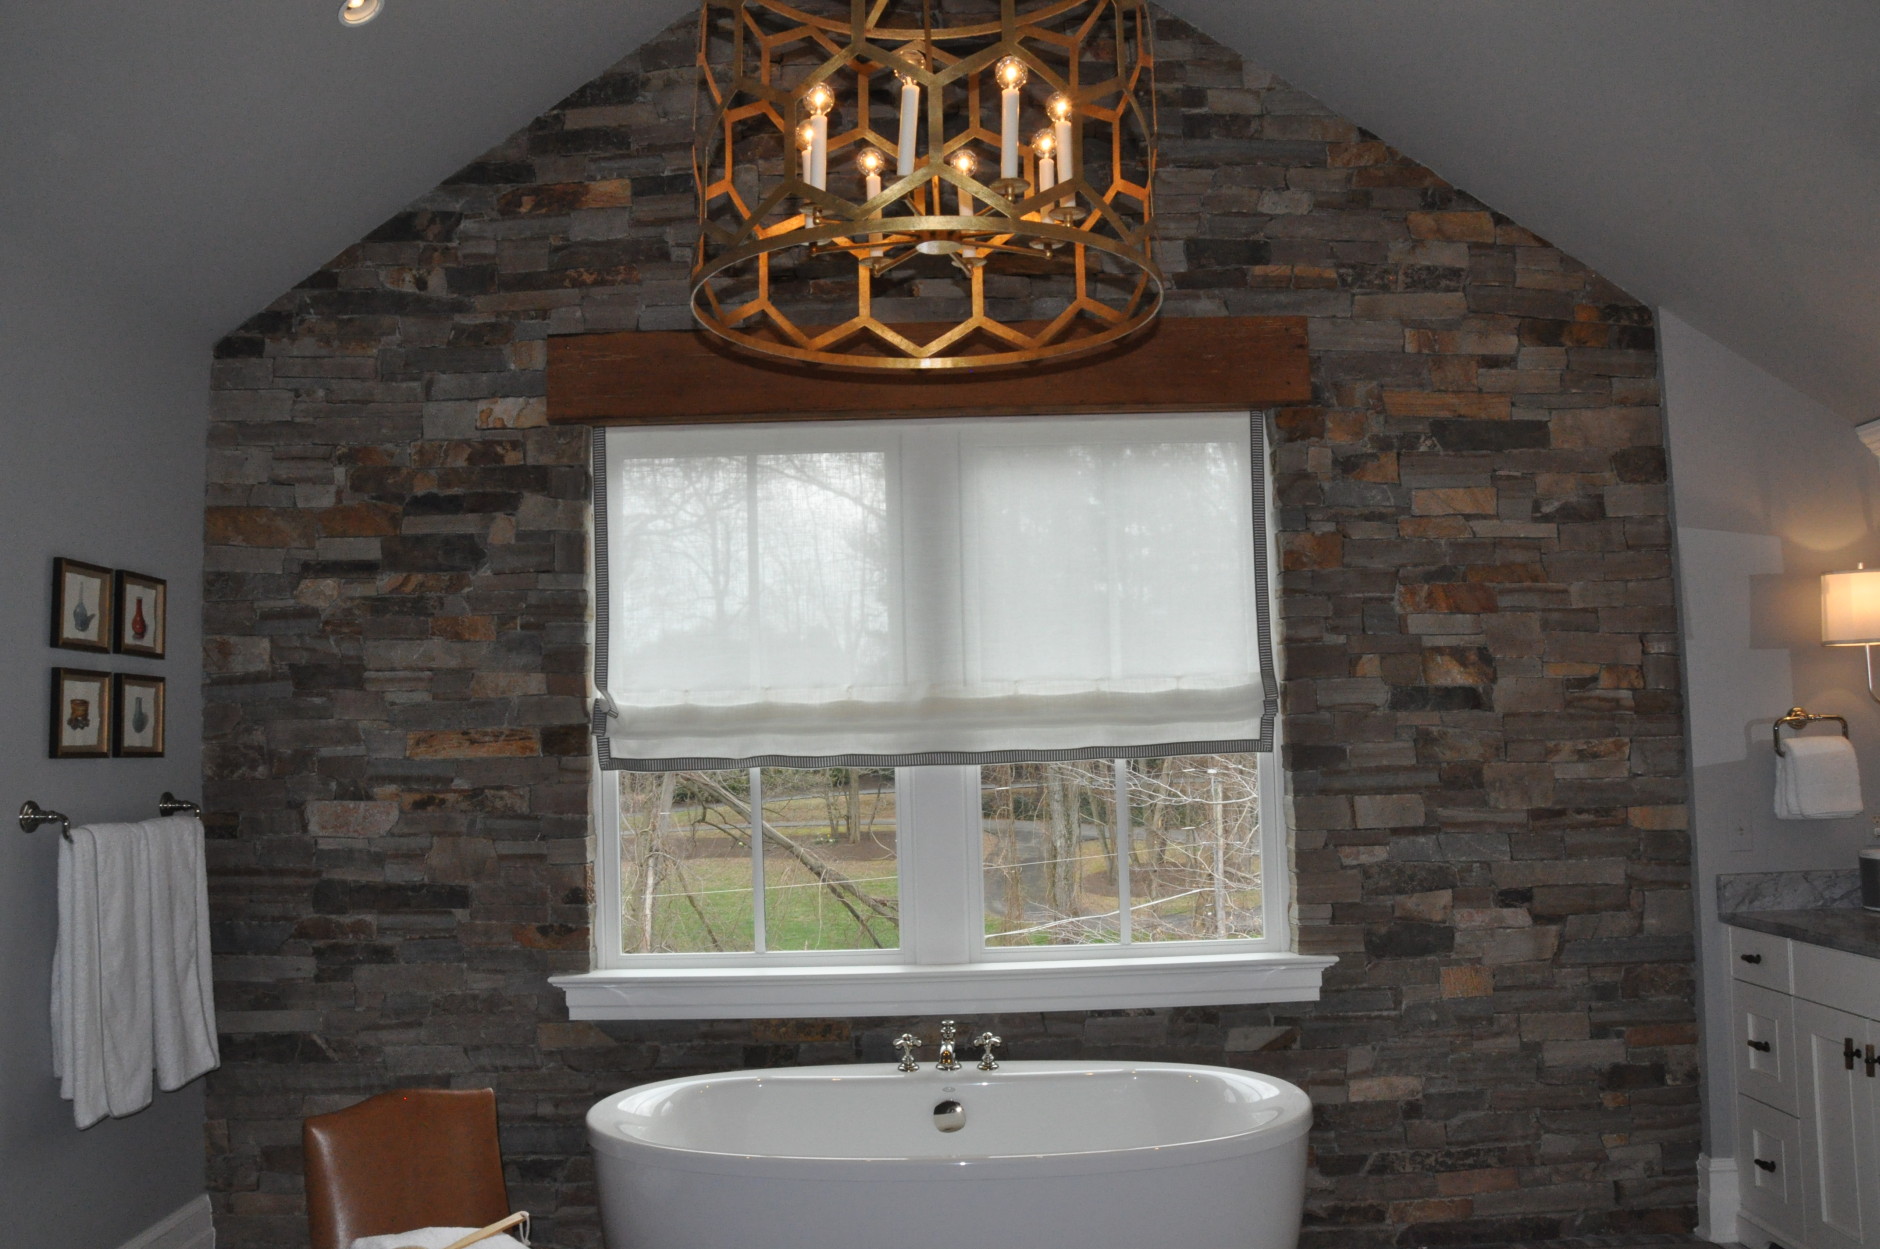 The main point of focus in the master bathroom, also designed by Christopher Patrick, is a floor-to-ceiling stone wall and simple oval-shaped tub. (WTOP/Rachel Nania) 